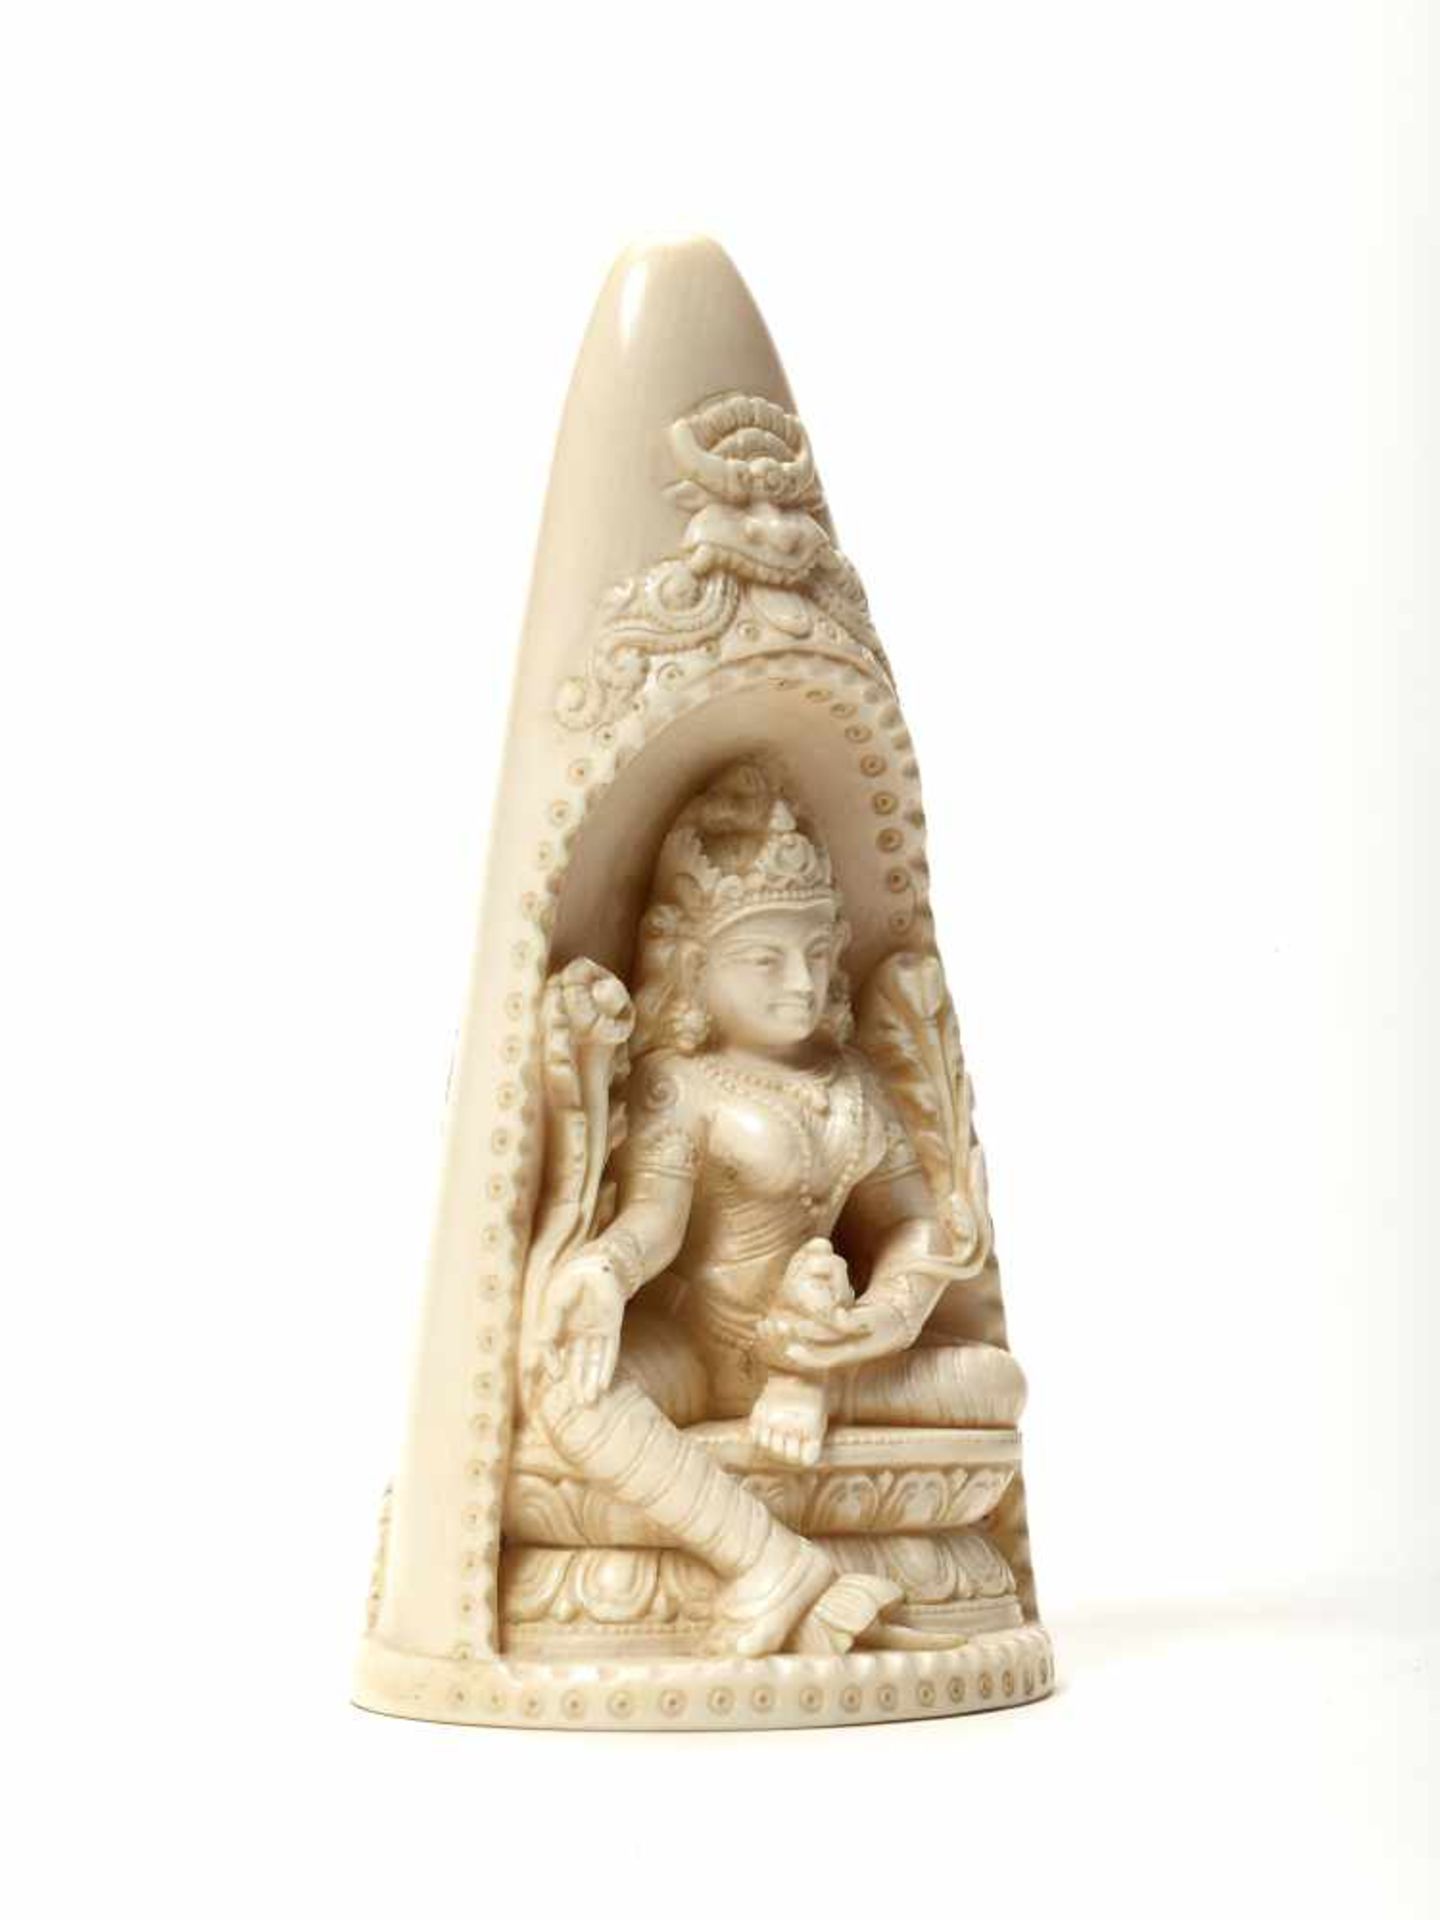 AN INDIAN IVORY TUSK CARVING OF PADMAPANI, 20th CENTURYIvoryIndia, 20th centuryThe ivory carved from - Image 5 of 5